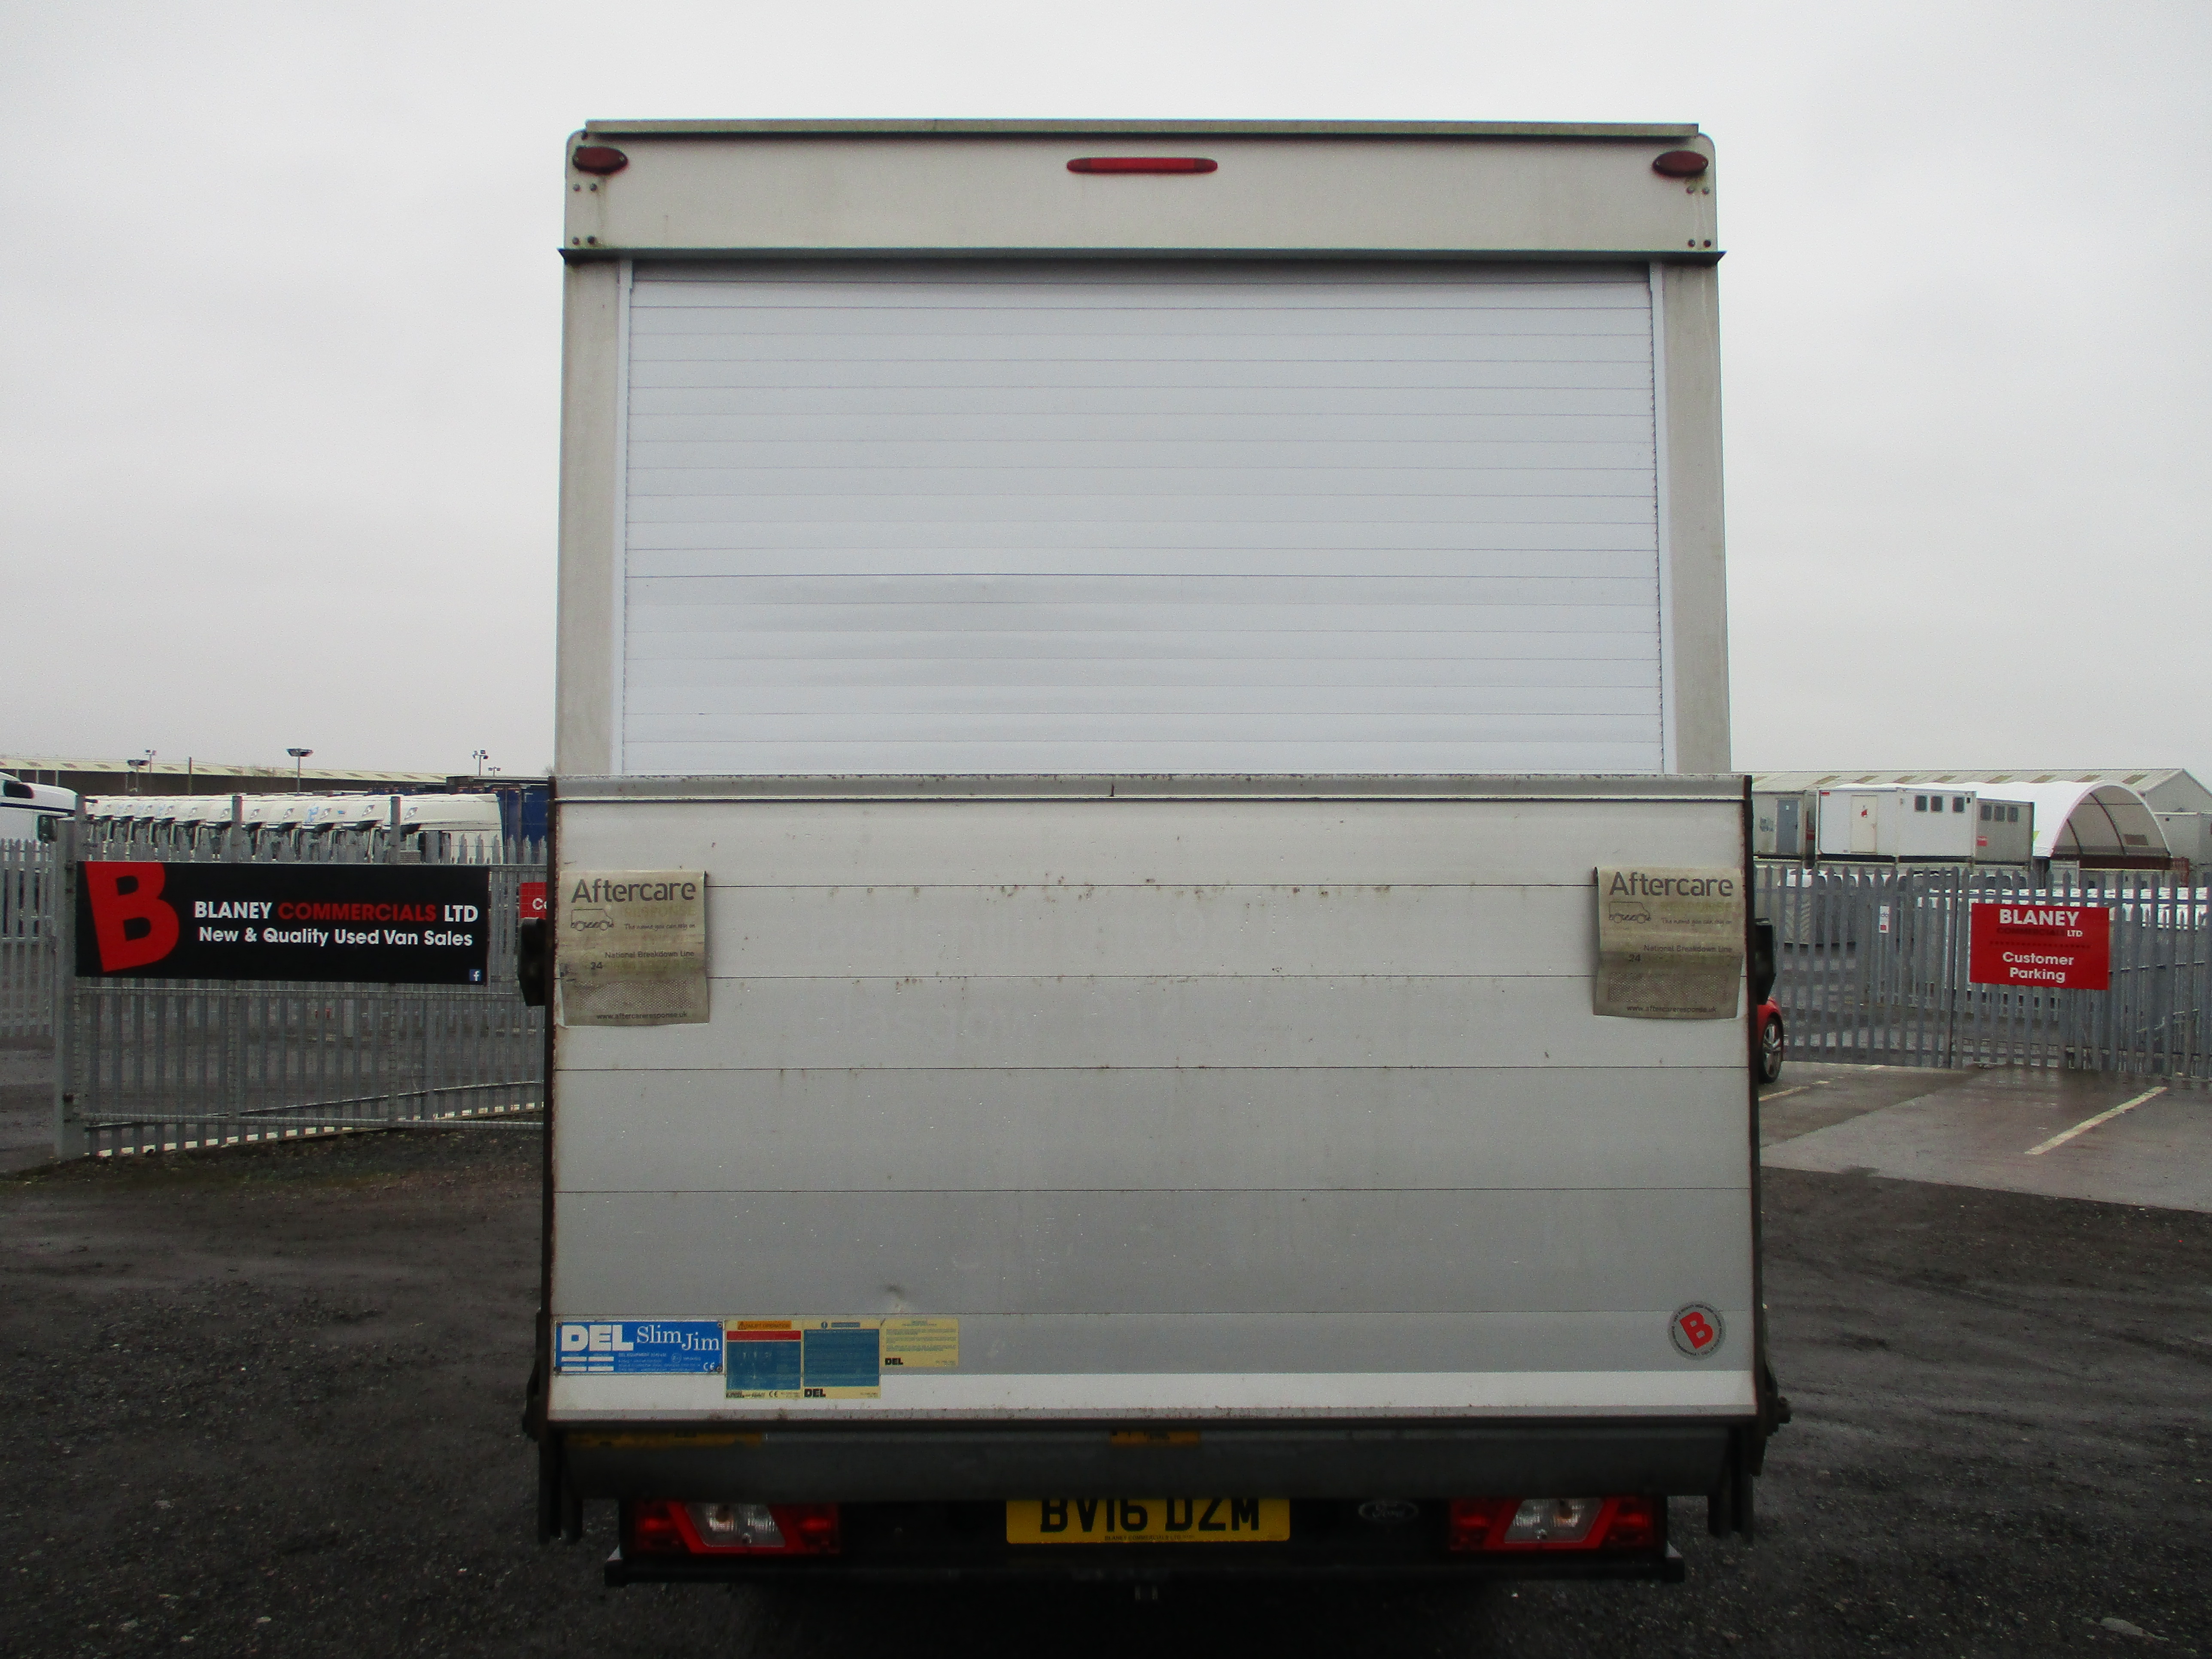 Ford Transit 350 L4 2.2 TDCi 125PS 'One Stop' Luton Van with Tail Lift